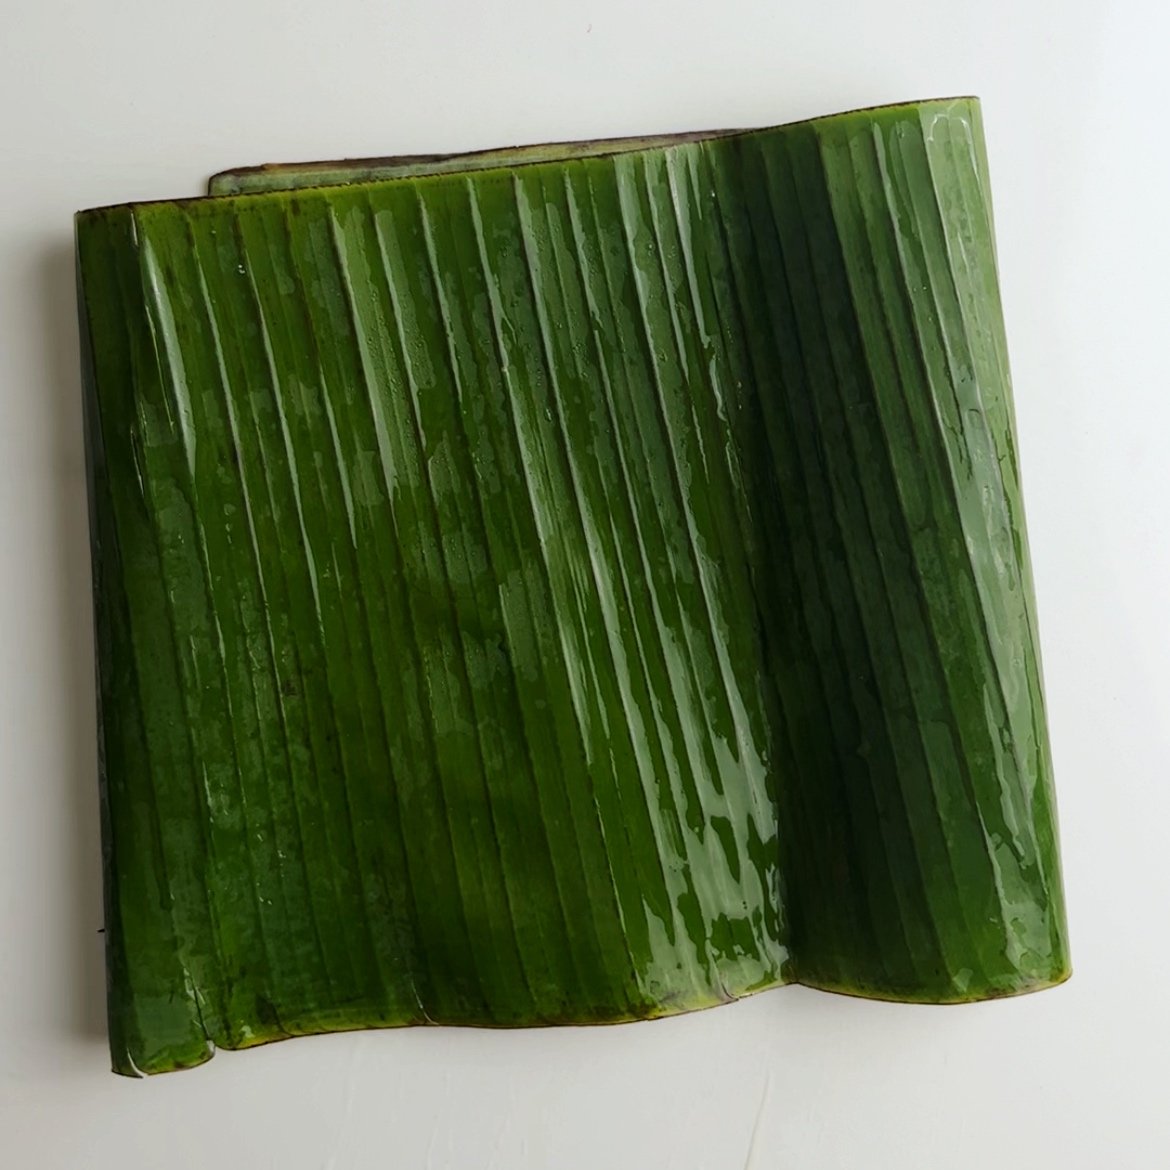 rolled up banana leaves on a white surface